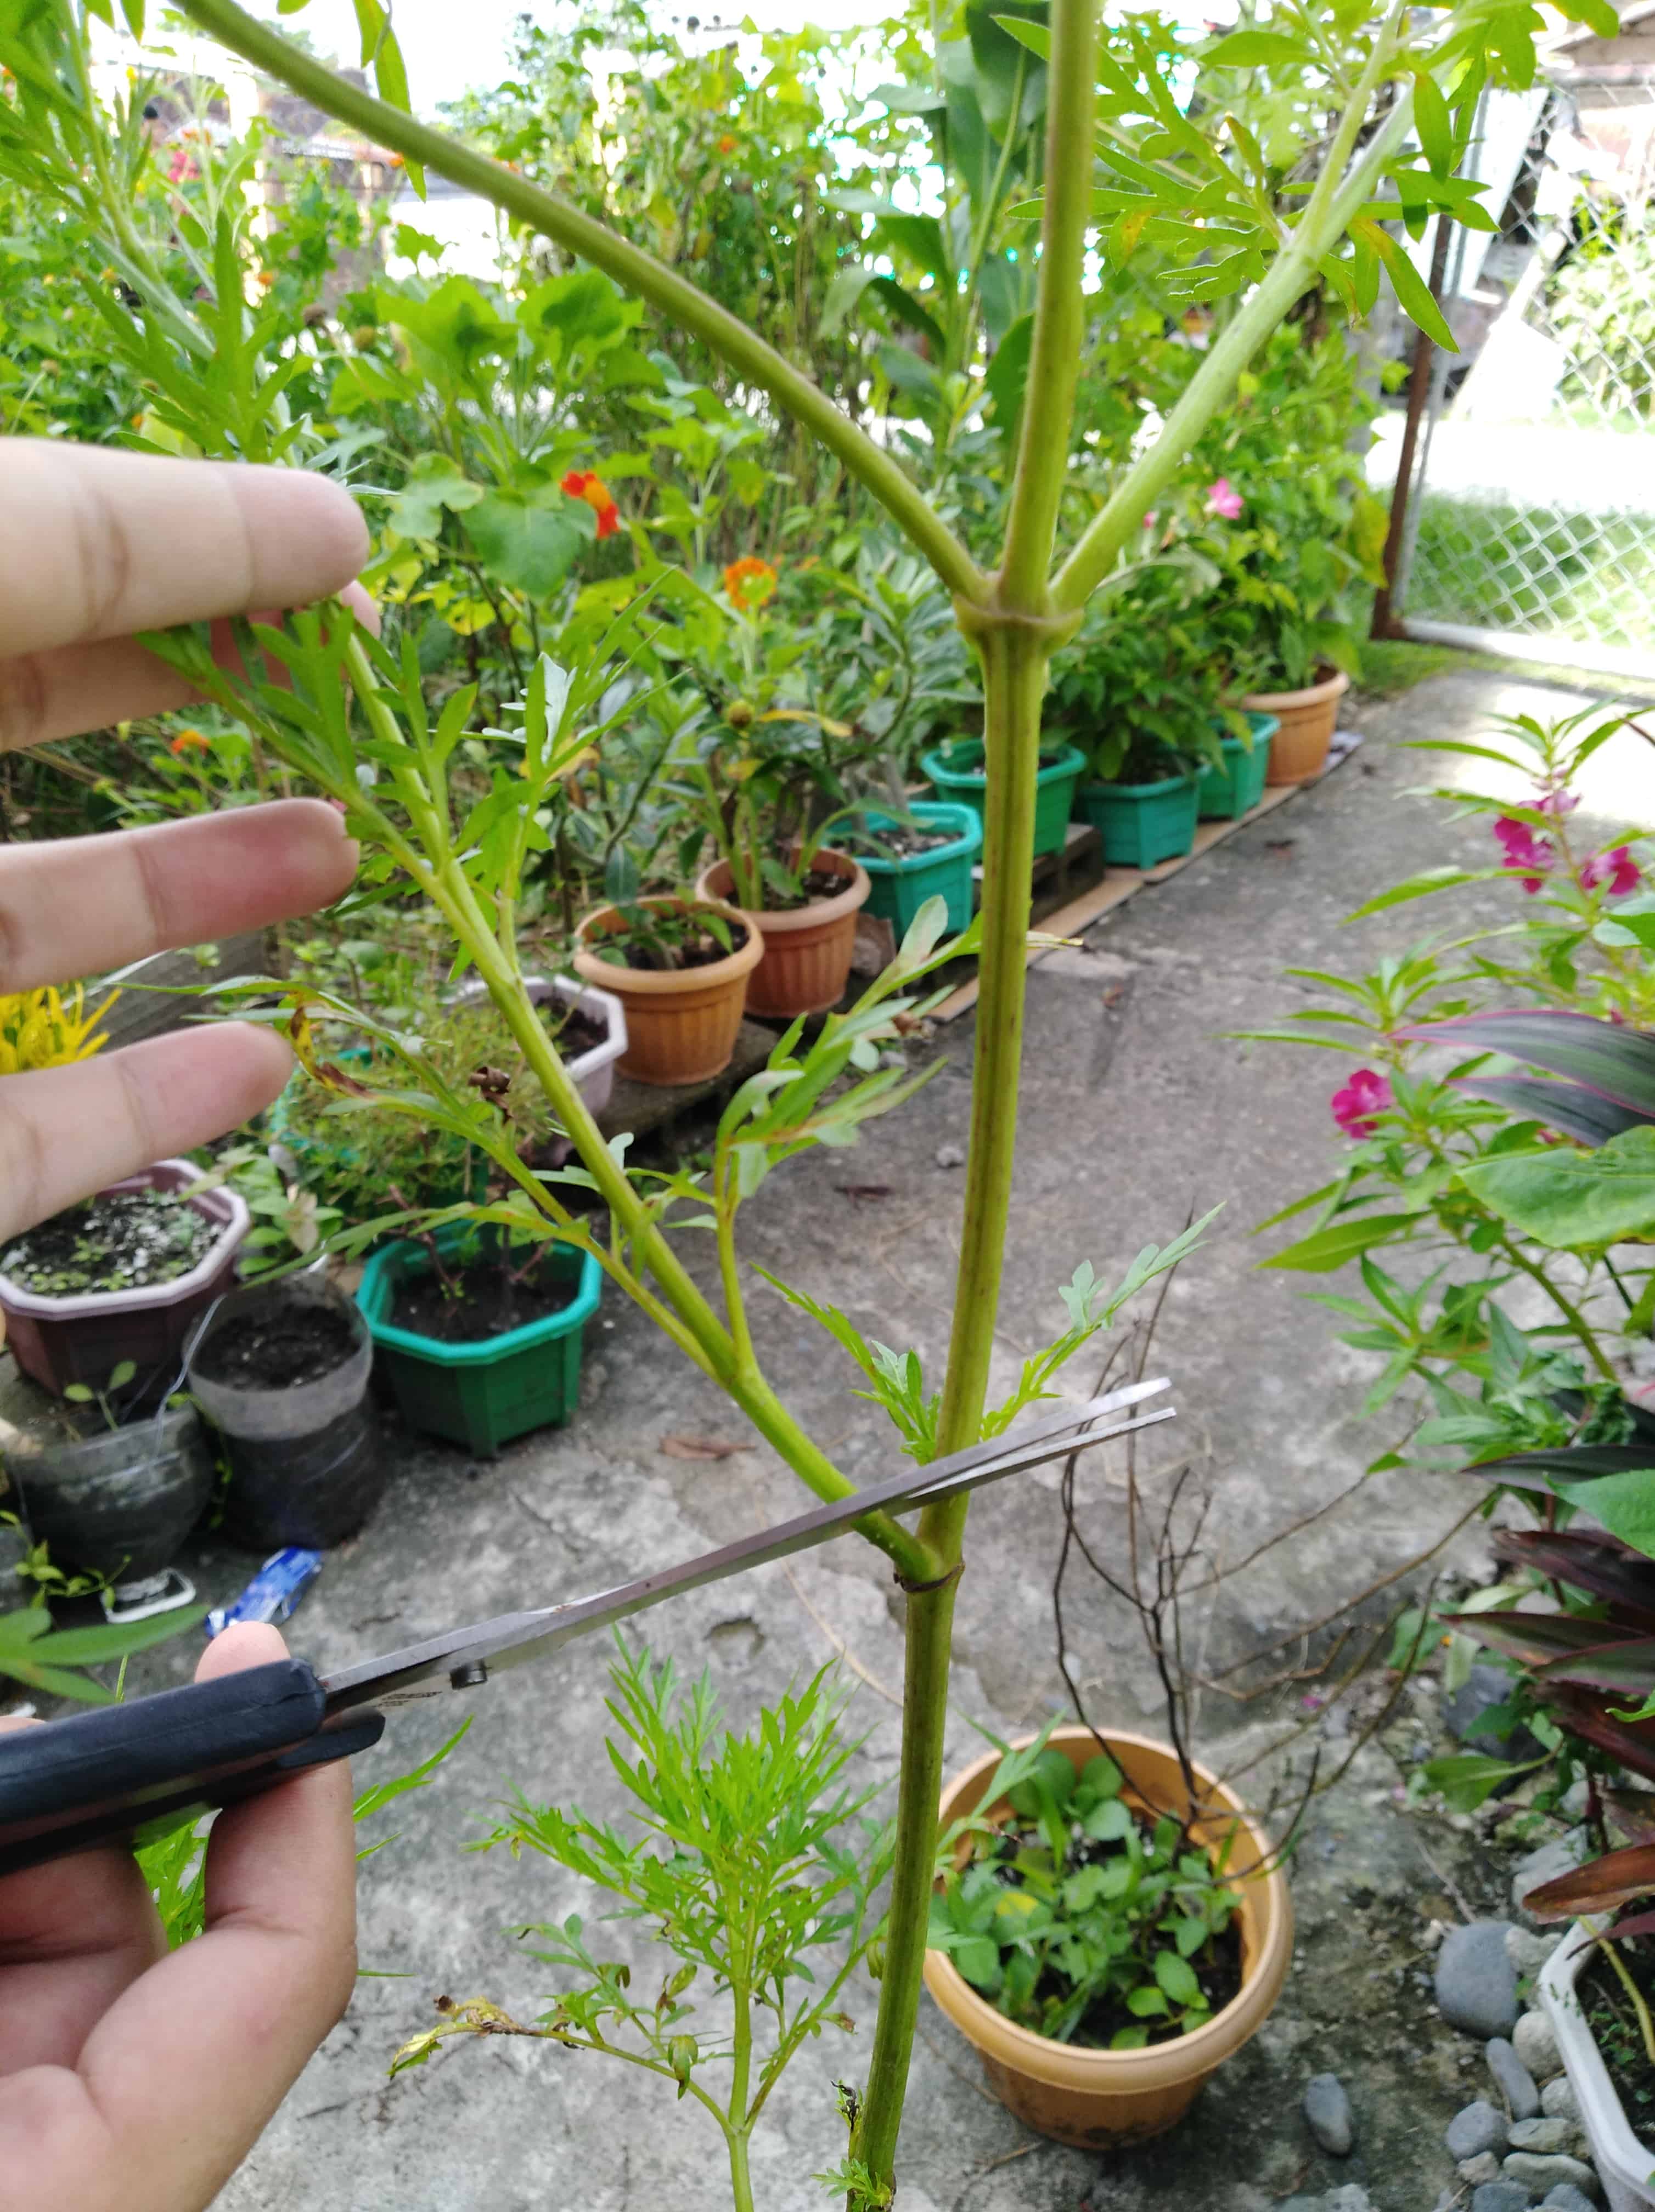 Selectively pruning the plant by removing side branches.